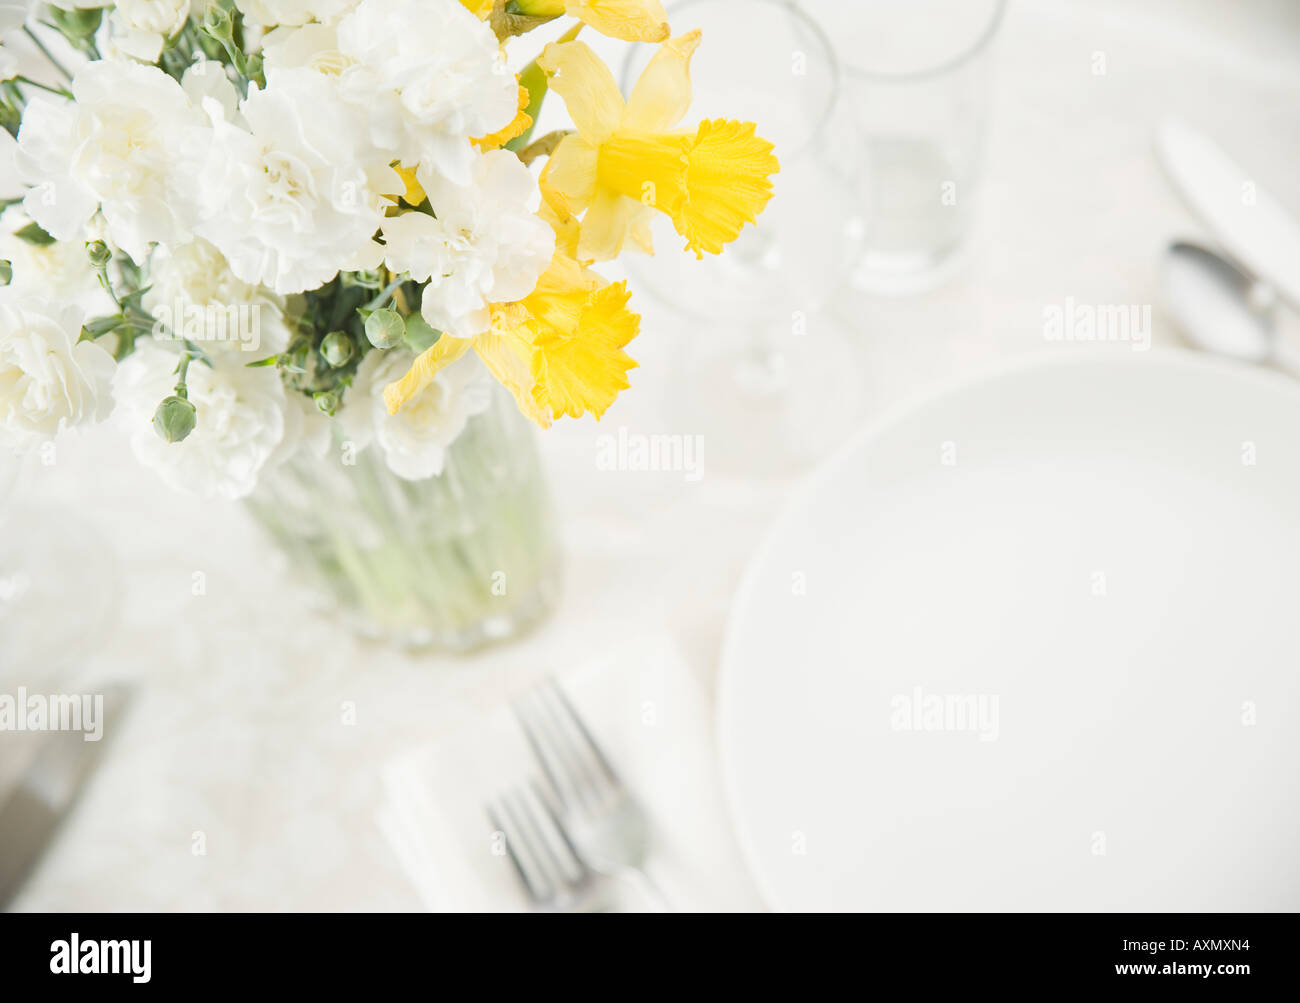 Table setting with flower arrangement Stock Photo